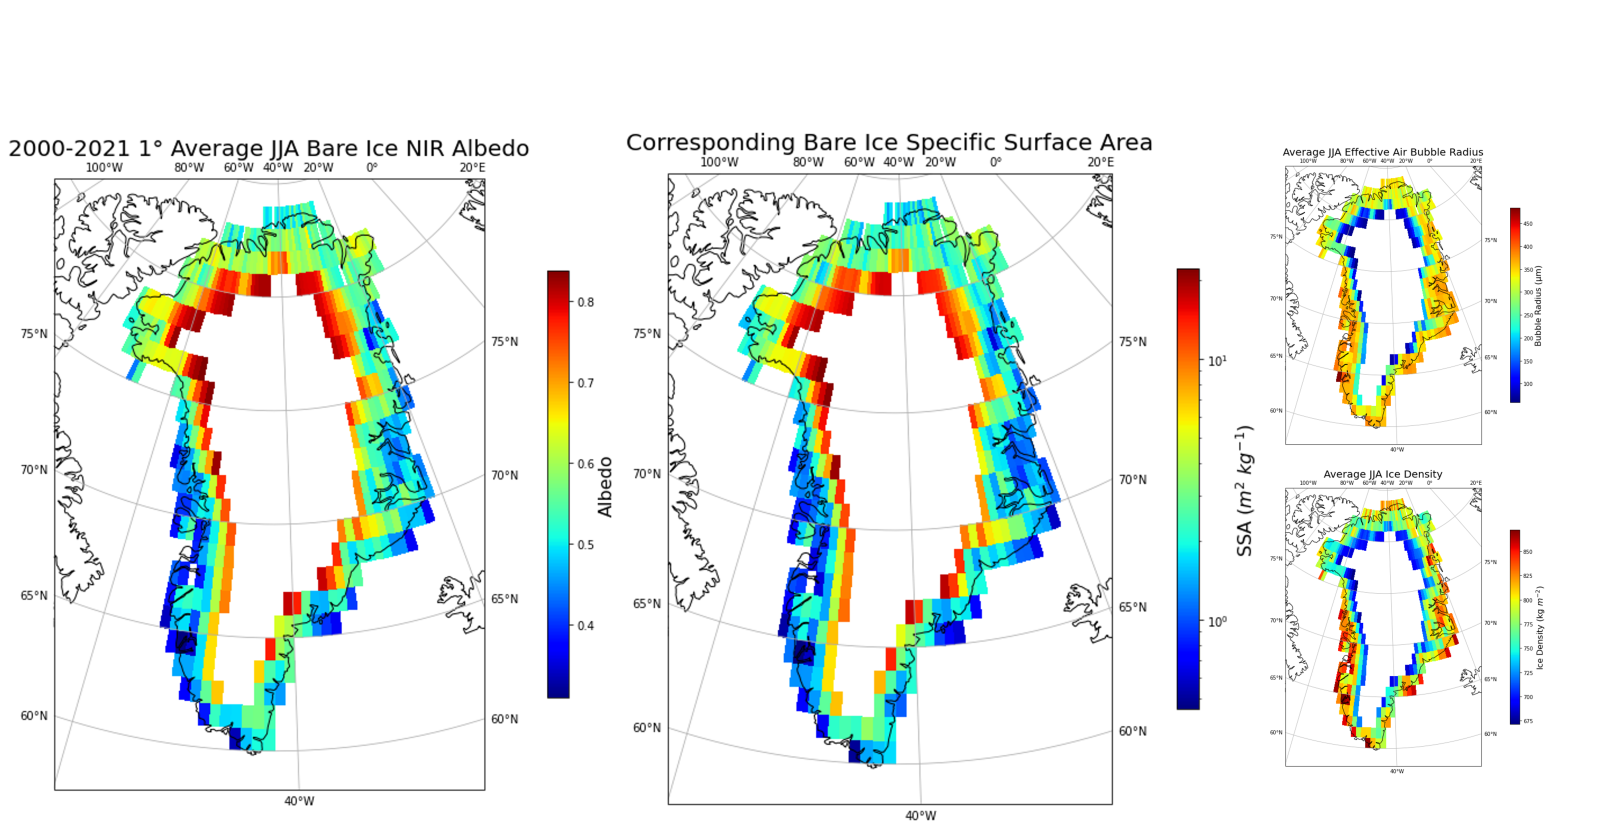 Visual maps showing bare ice NIR albedo, specific surface area, effective air bubble radius, and ice density around Greenland.